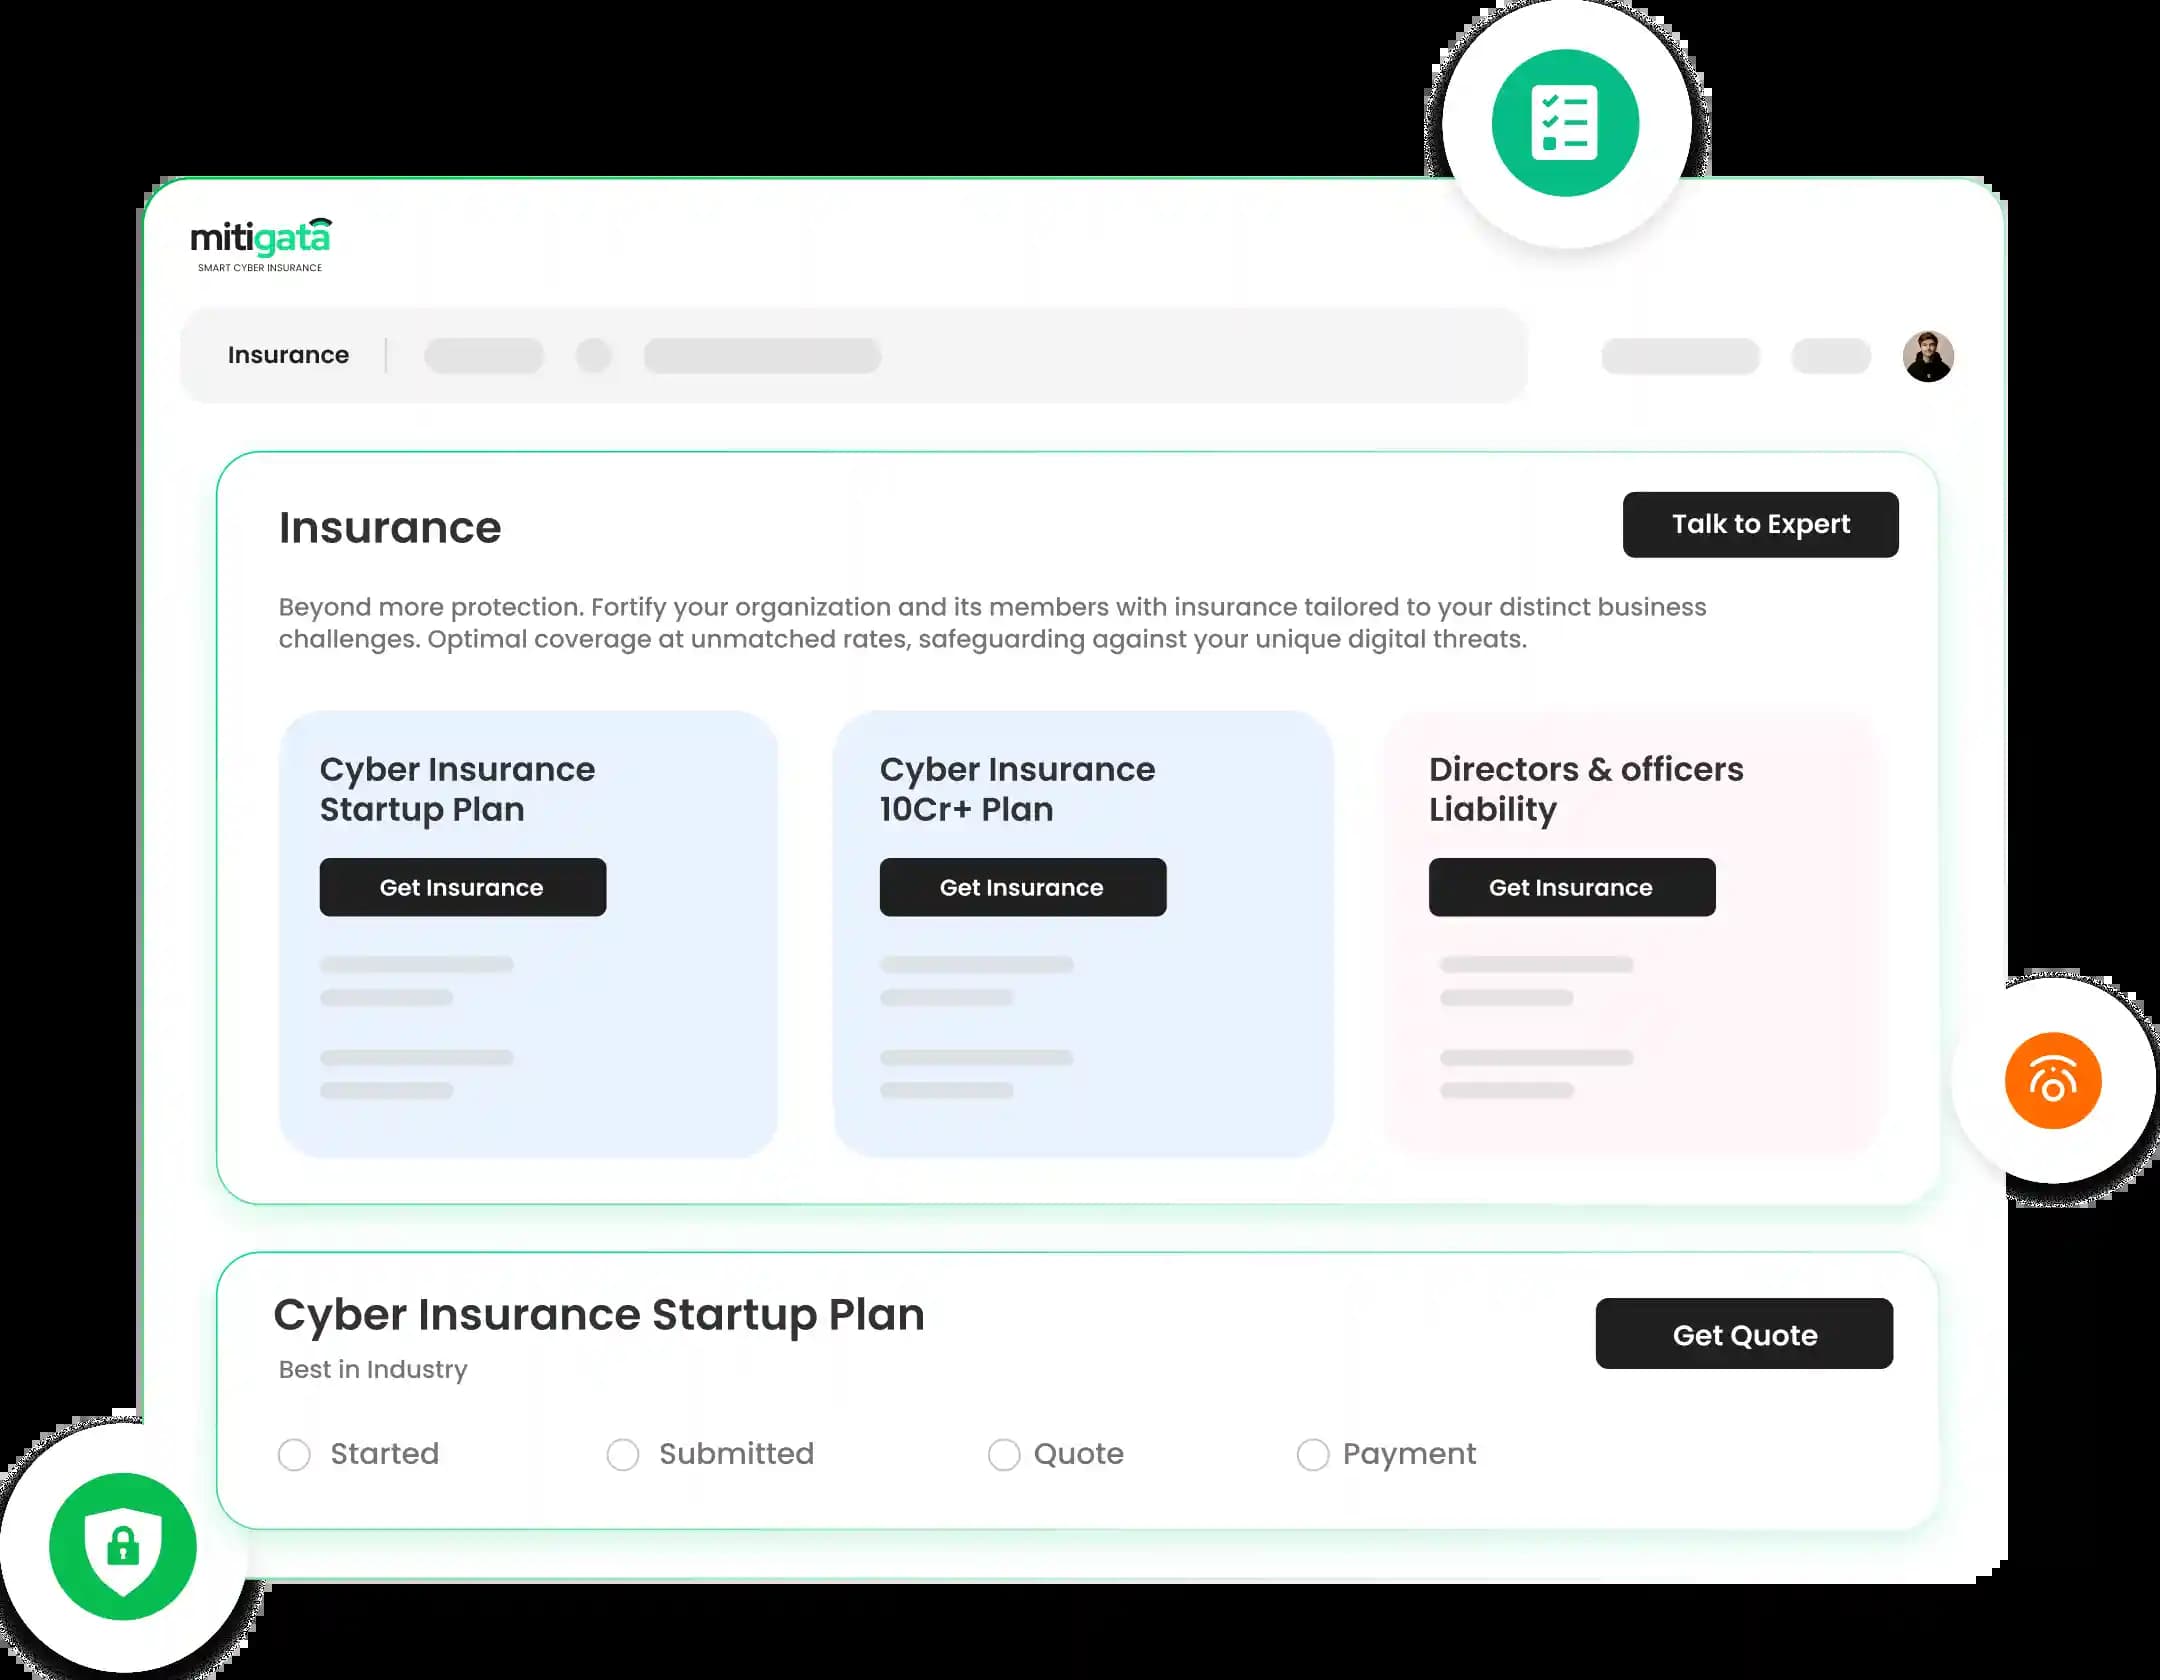 Cyber insurance plans listing with options for startups and directors on Mitigata's homepage.